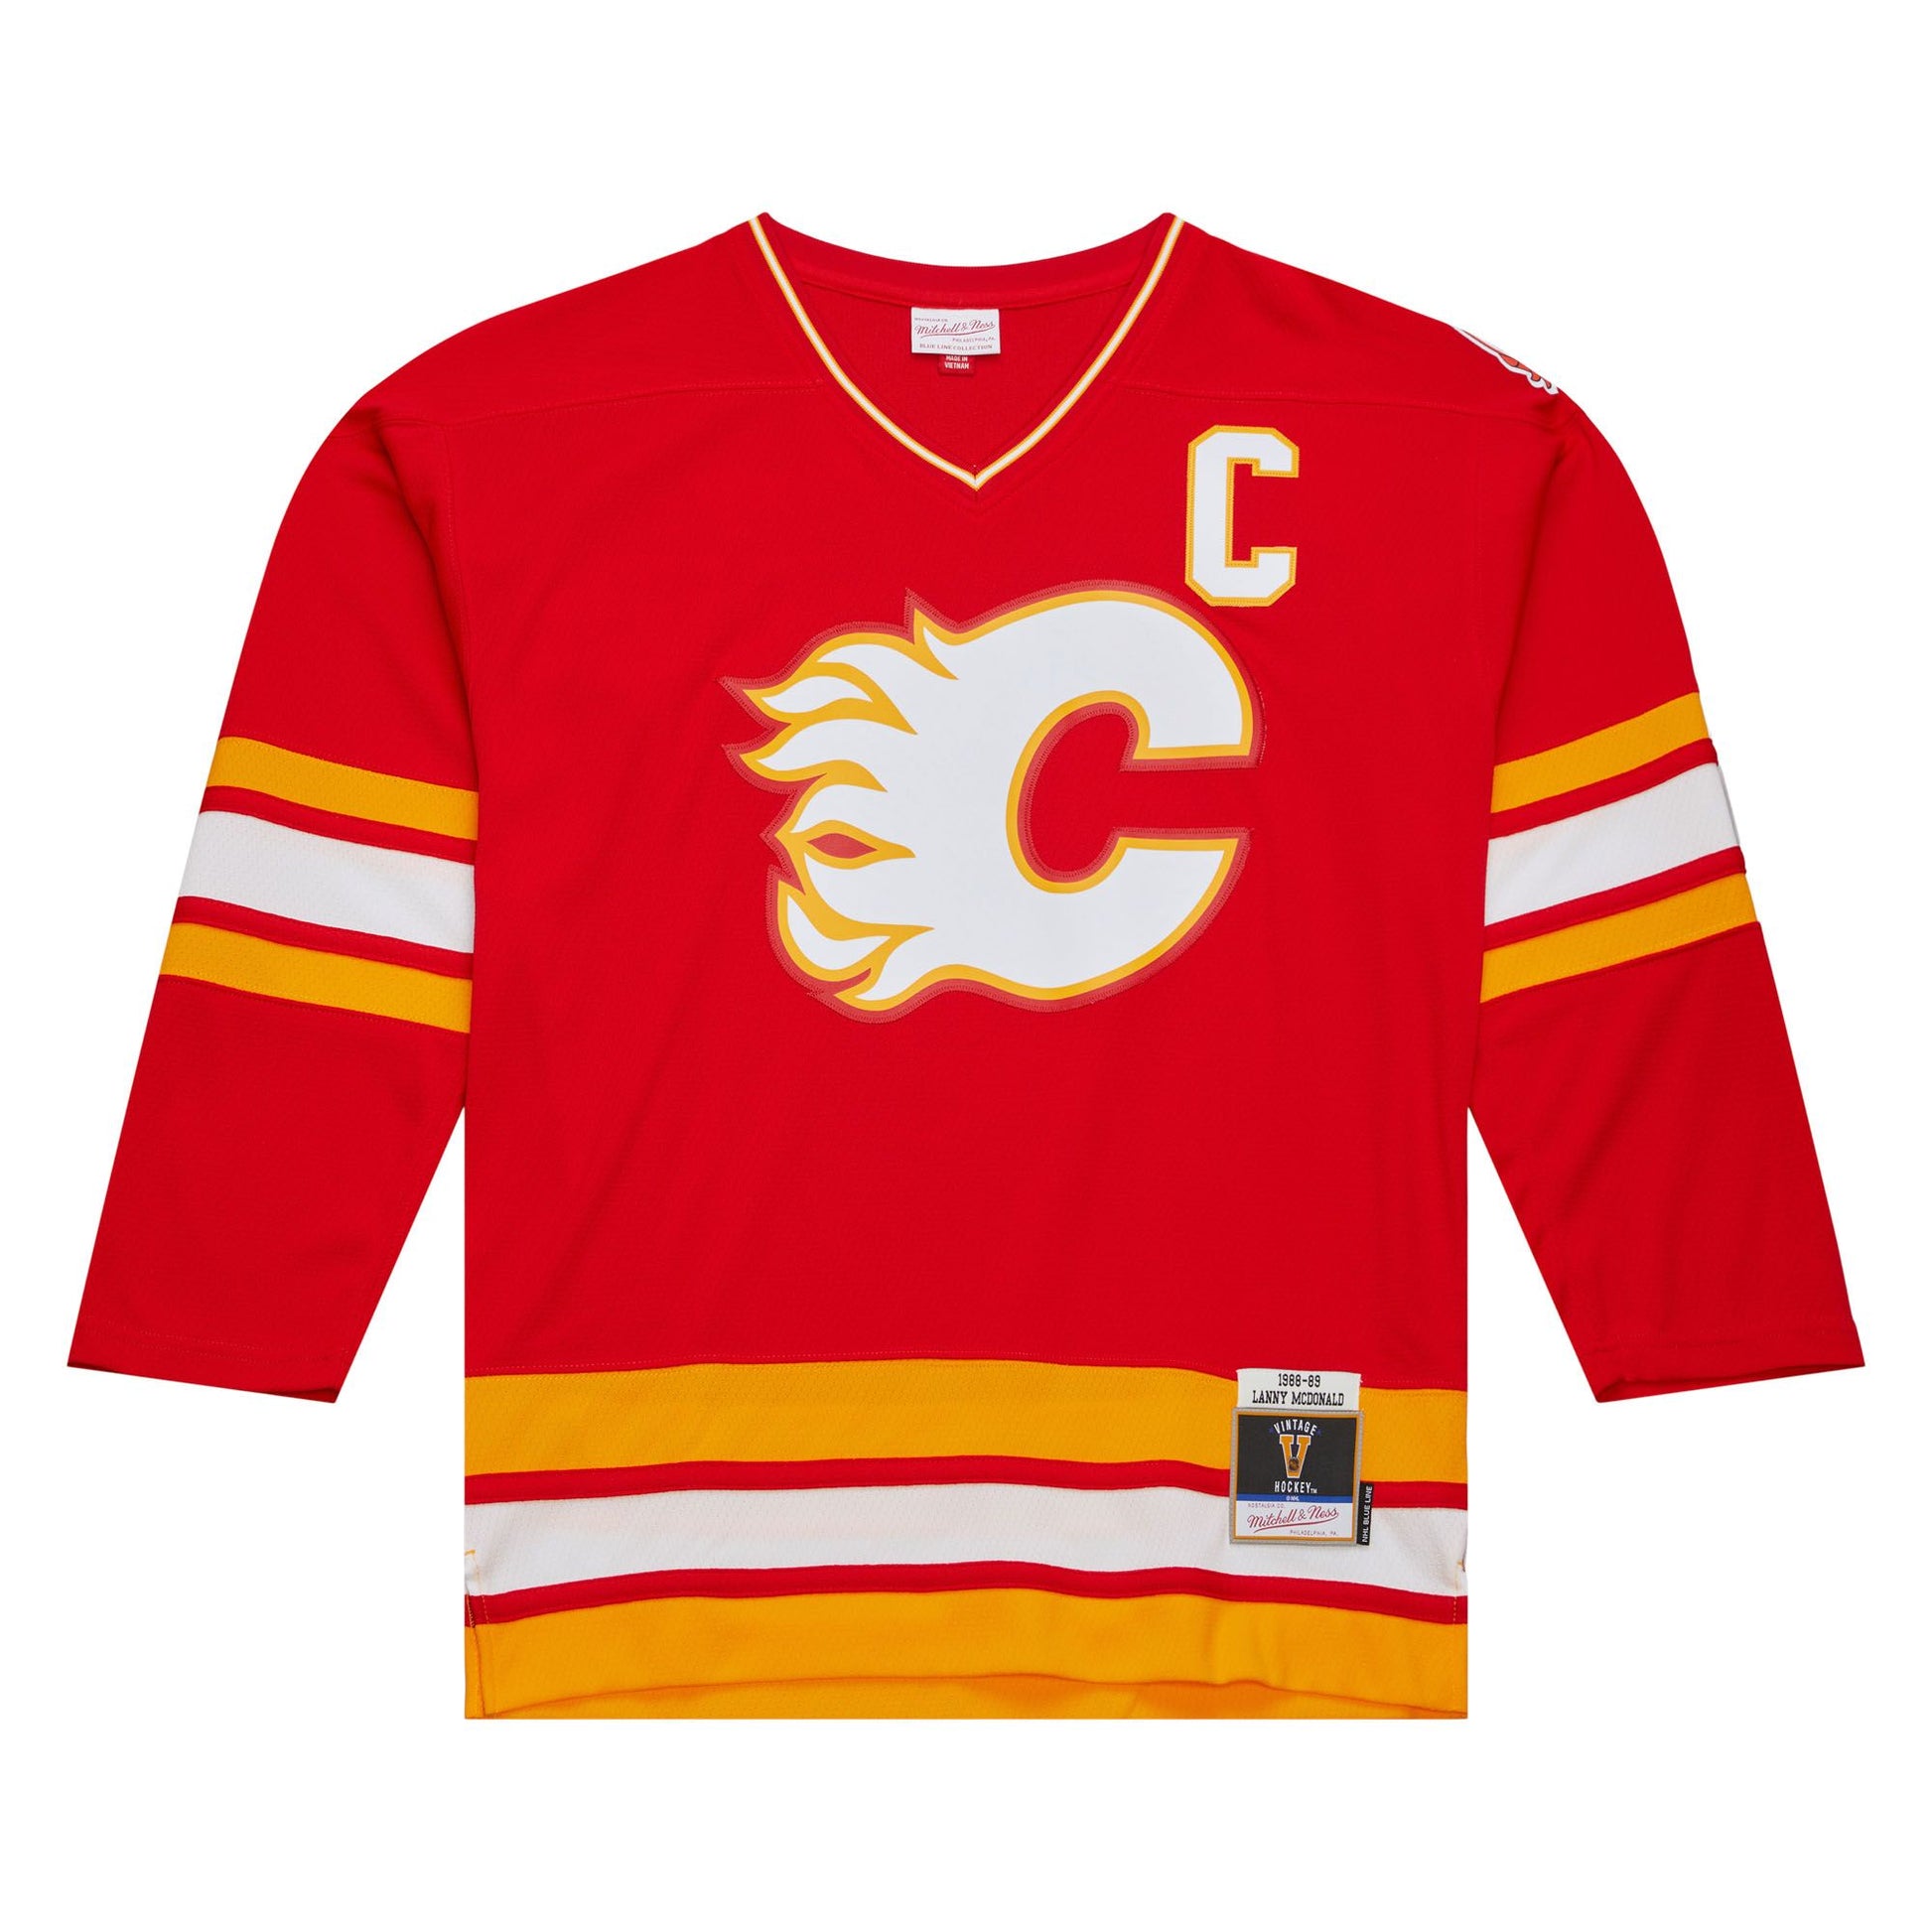 Mitchell and Ness Blue Line Lanny McDonald Calgary Flames 1988-89 Jersey